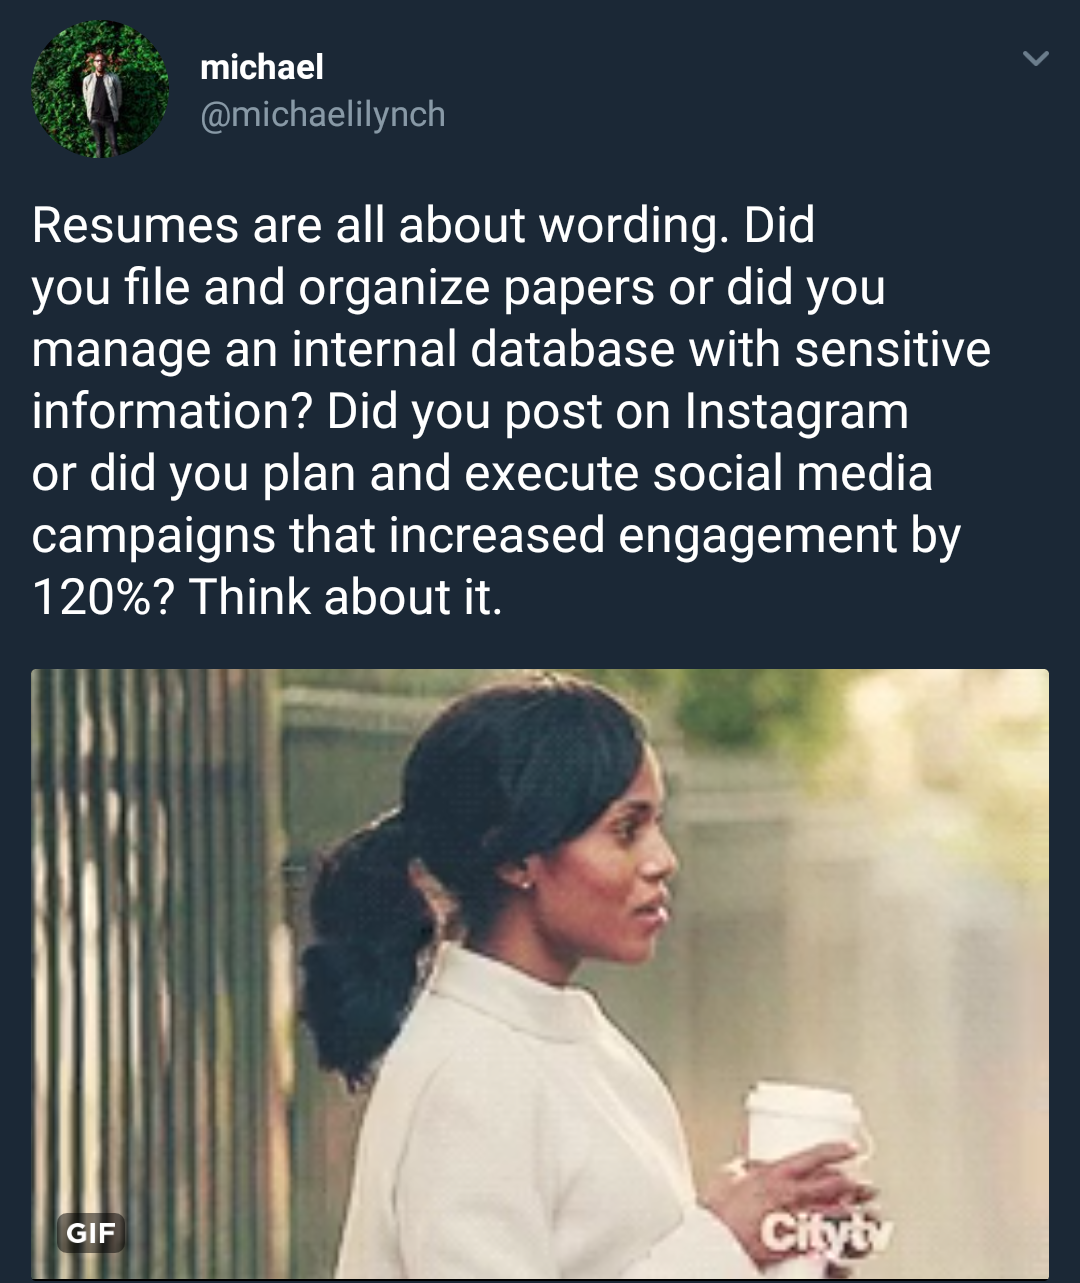 media - michael Resumes are all about wording. Did you file and organize papers or did you manage an internal database with sensitive information? Did you post on Instagram or did you plan and execute social media campaigns that increased engagement by 12